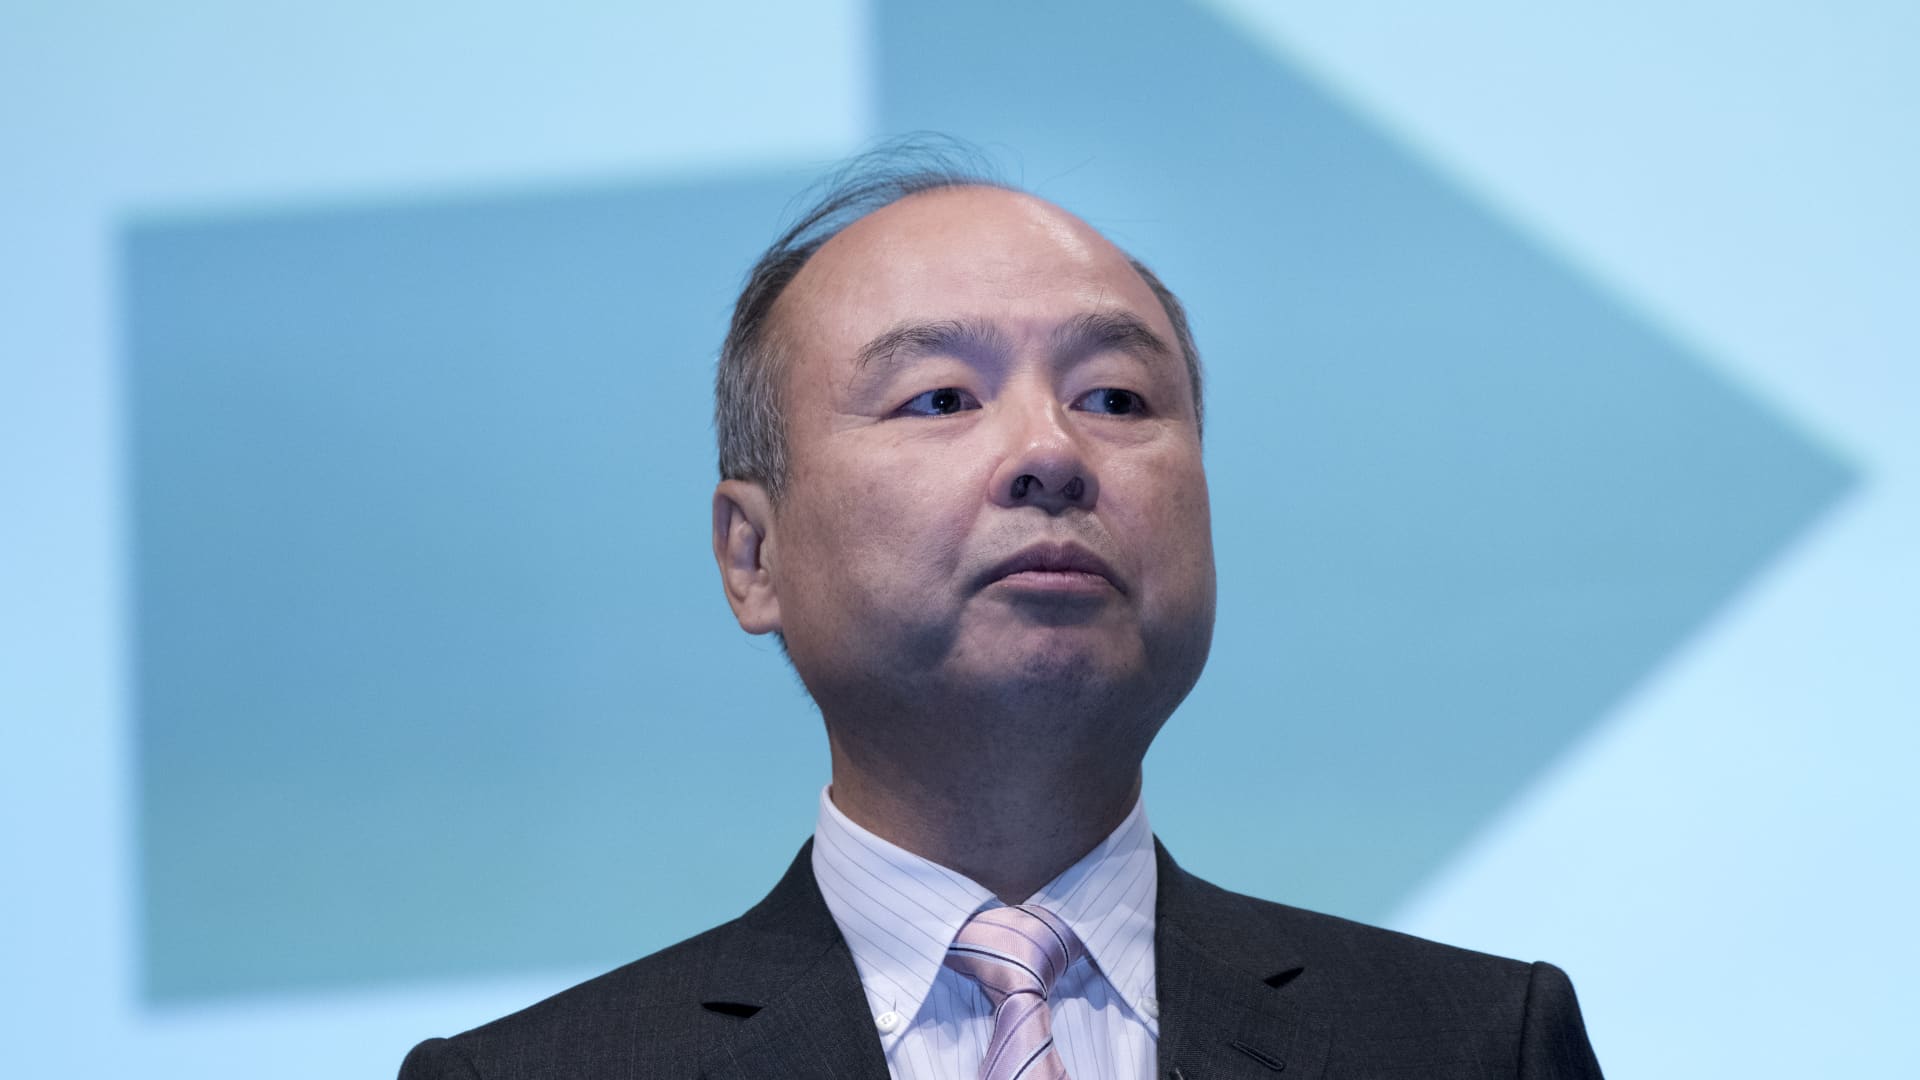 SoftBank's Masayoshi Son got caught up in the bitcoin frenzy and reportedly lost $130 million